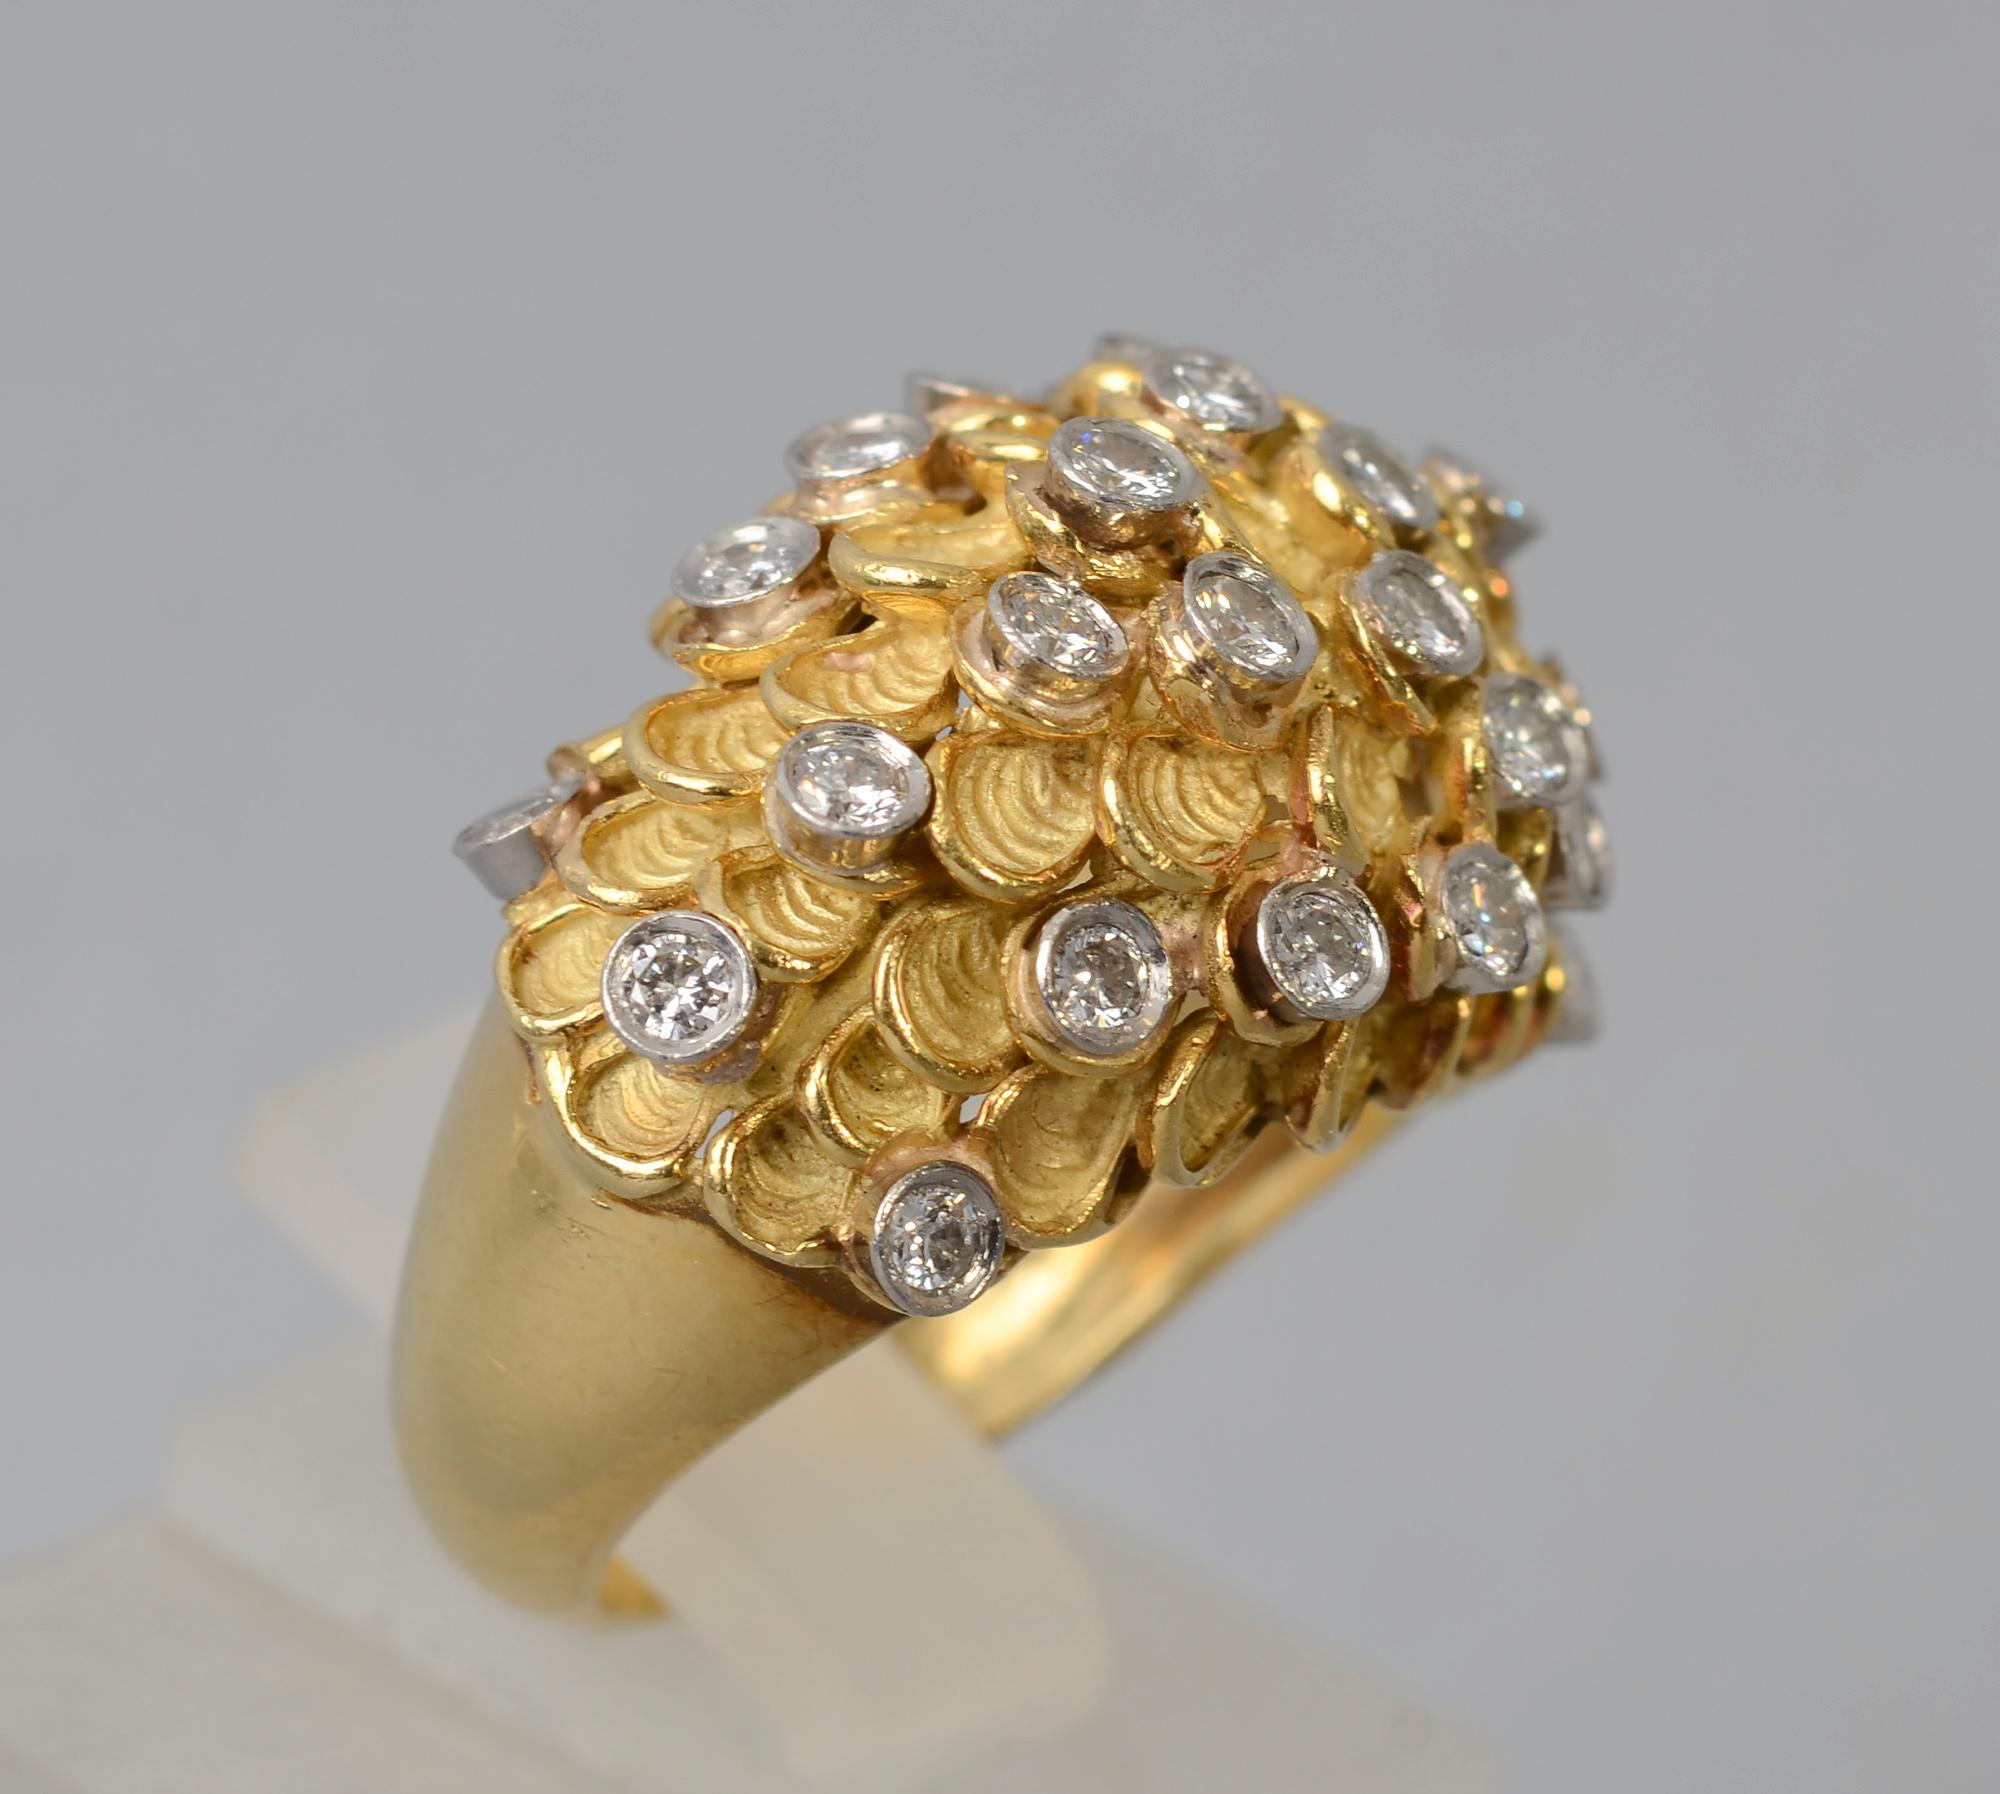 Unusual domed 18 karat gold cocktail ring comprised of textured half circles and diamonds. The ring has 27 European cut diamonds with a total weight of approximately one carat. There is a partial maker's mark that is not legible. The ring is size 8